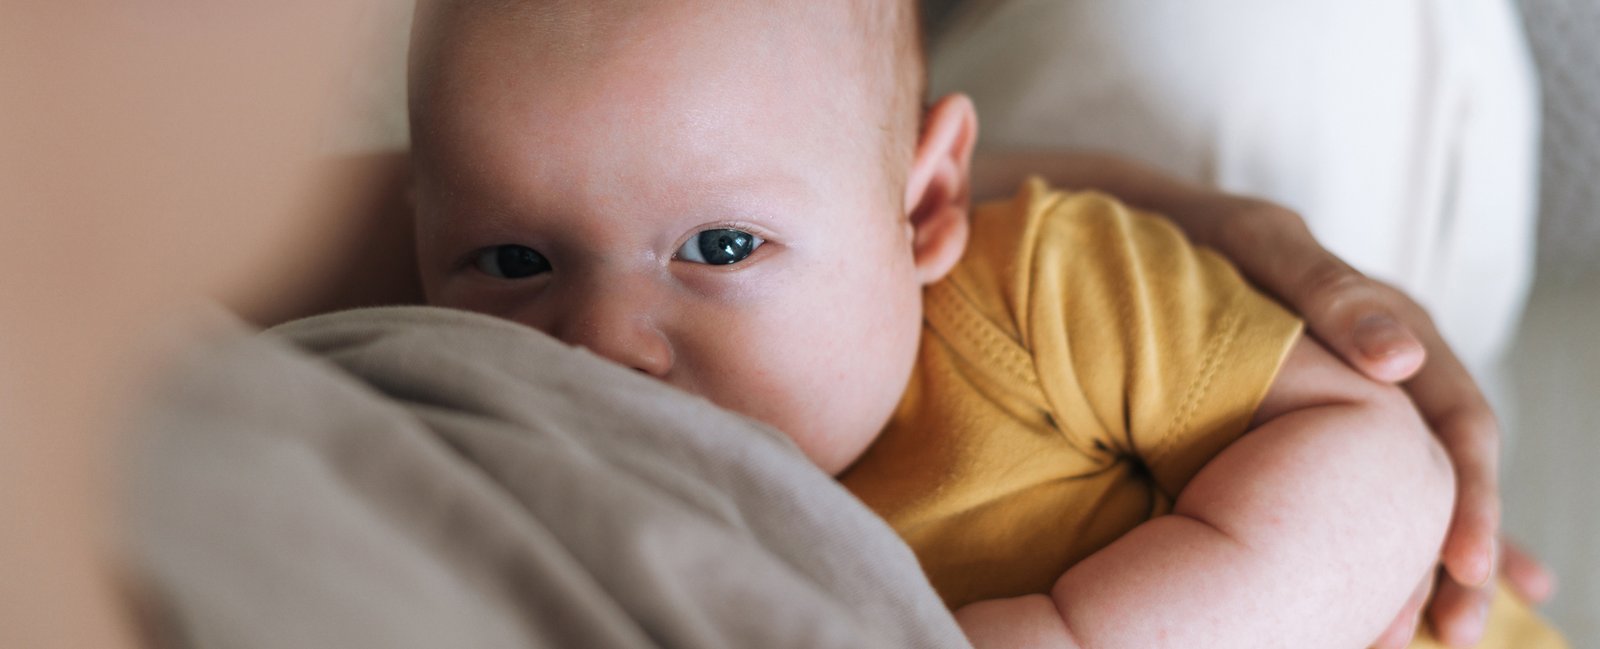 THC From Cannabis Could Linger in Breast Milk For a Long Time ScienceAlert